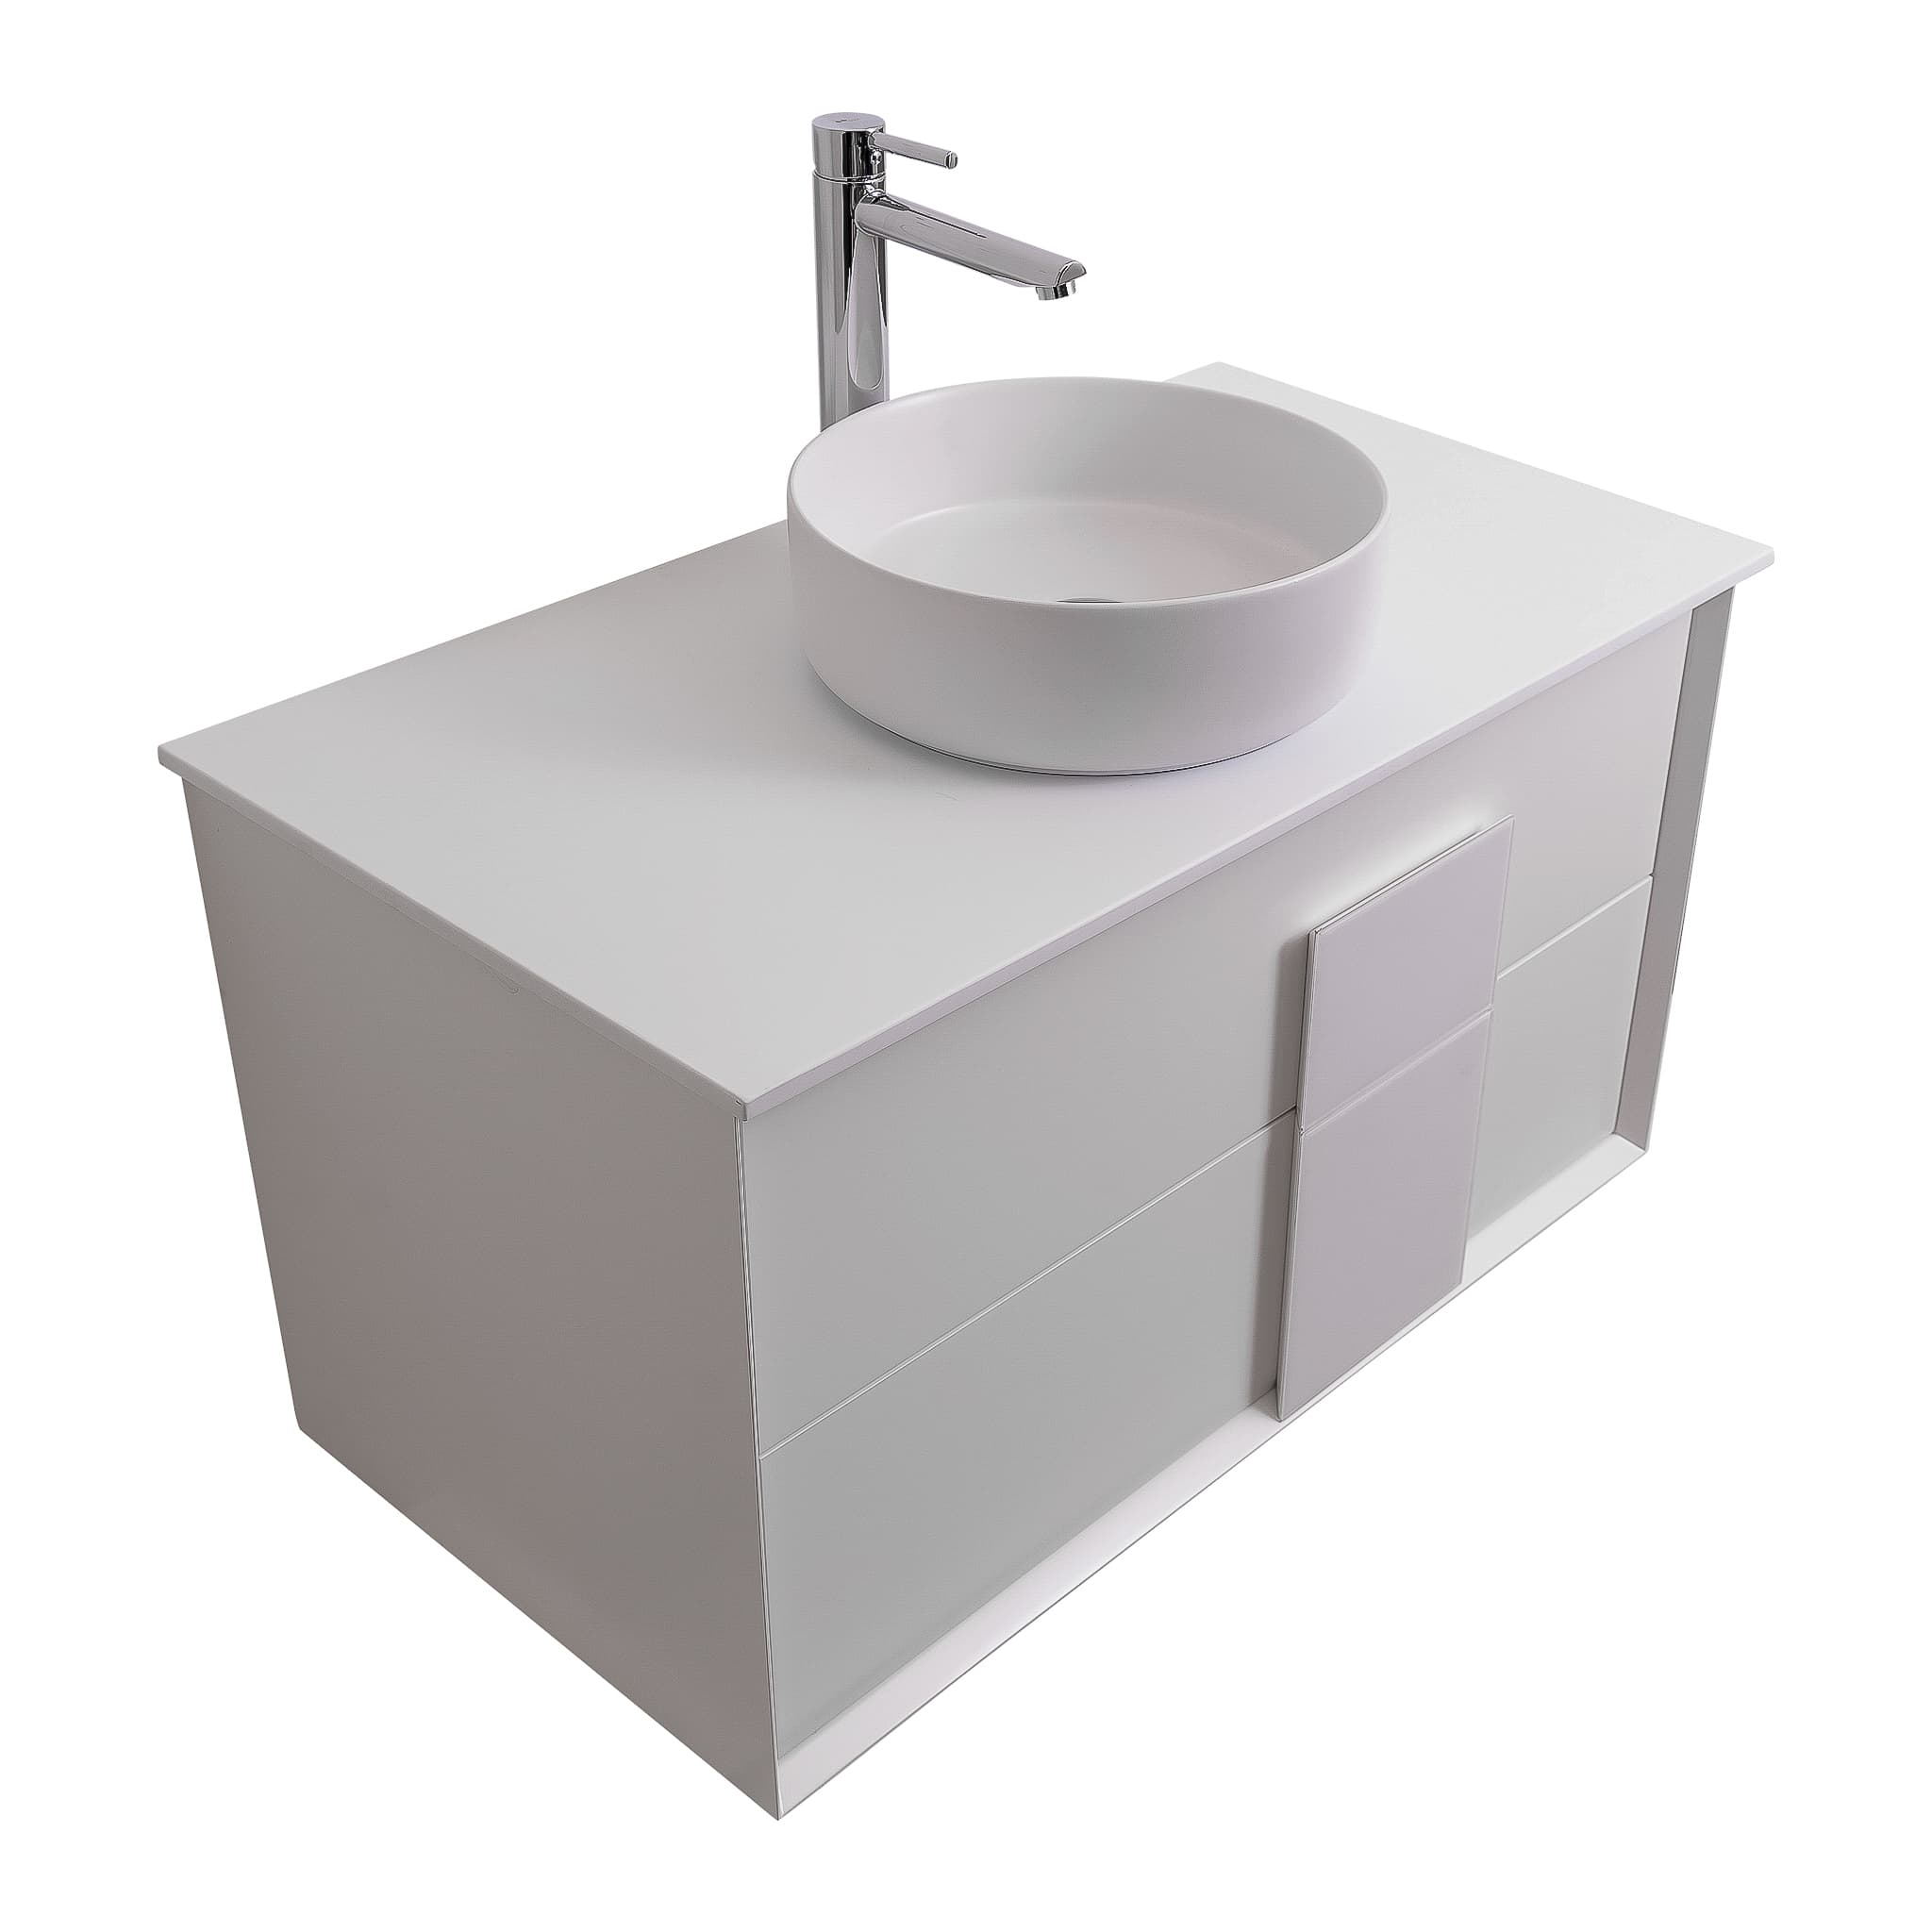 Piazza 31.5 Matte White With White Handle Cabinet, Ares White Top and Ares White Ceramic Basin, Wall Mounted Modern Vanity Set